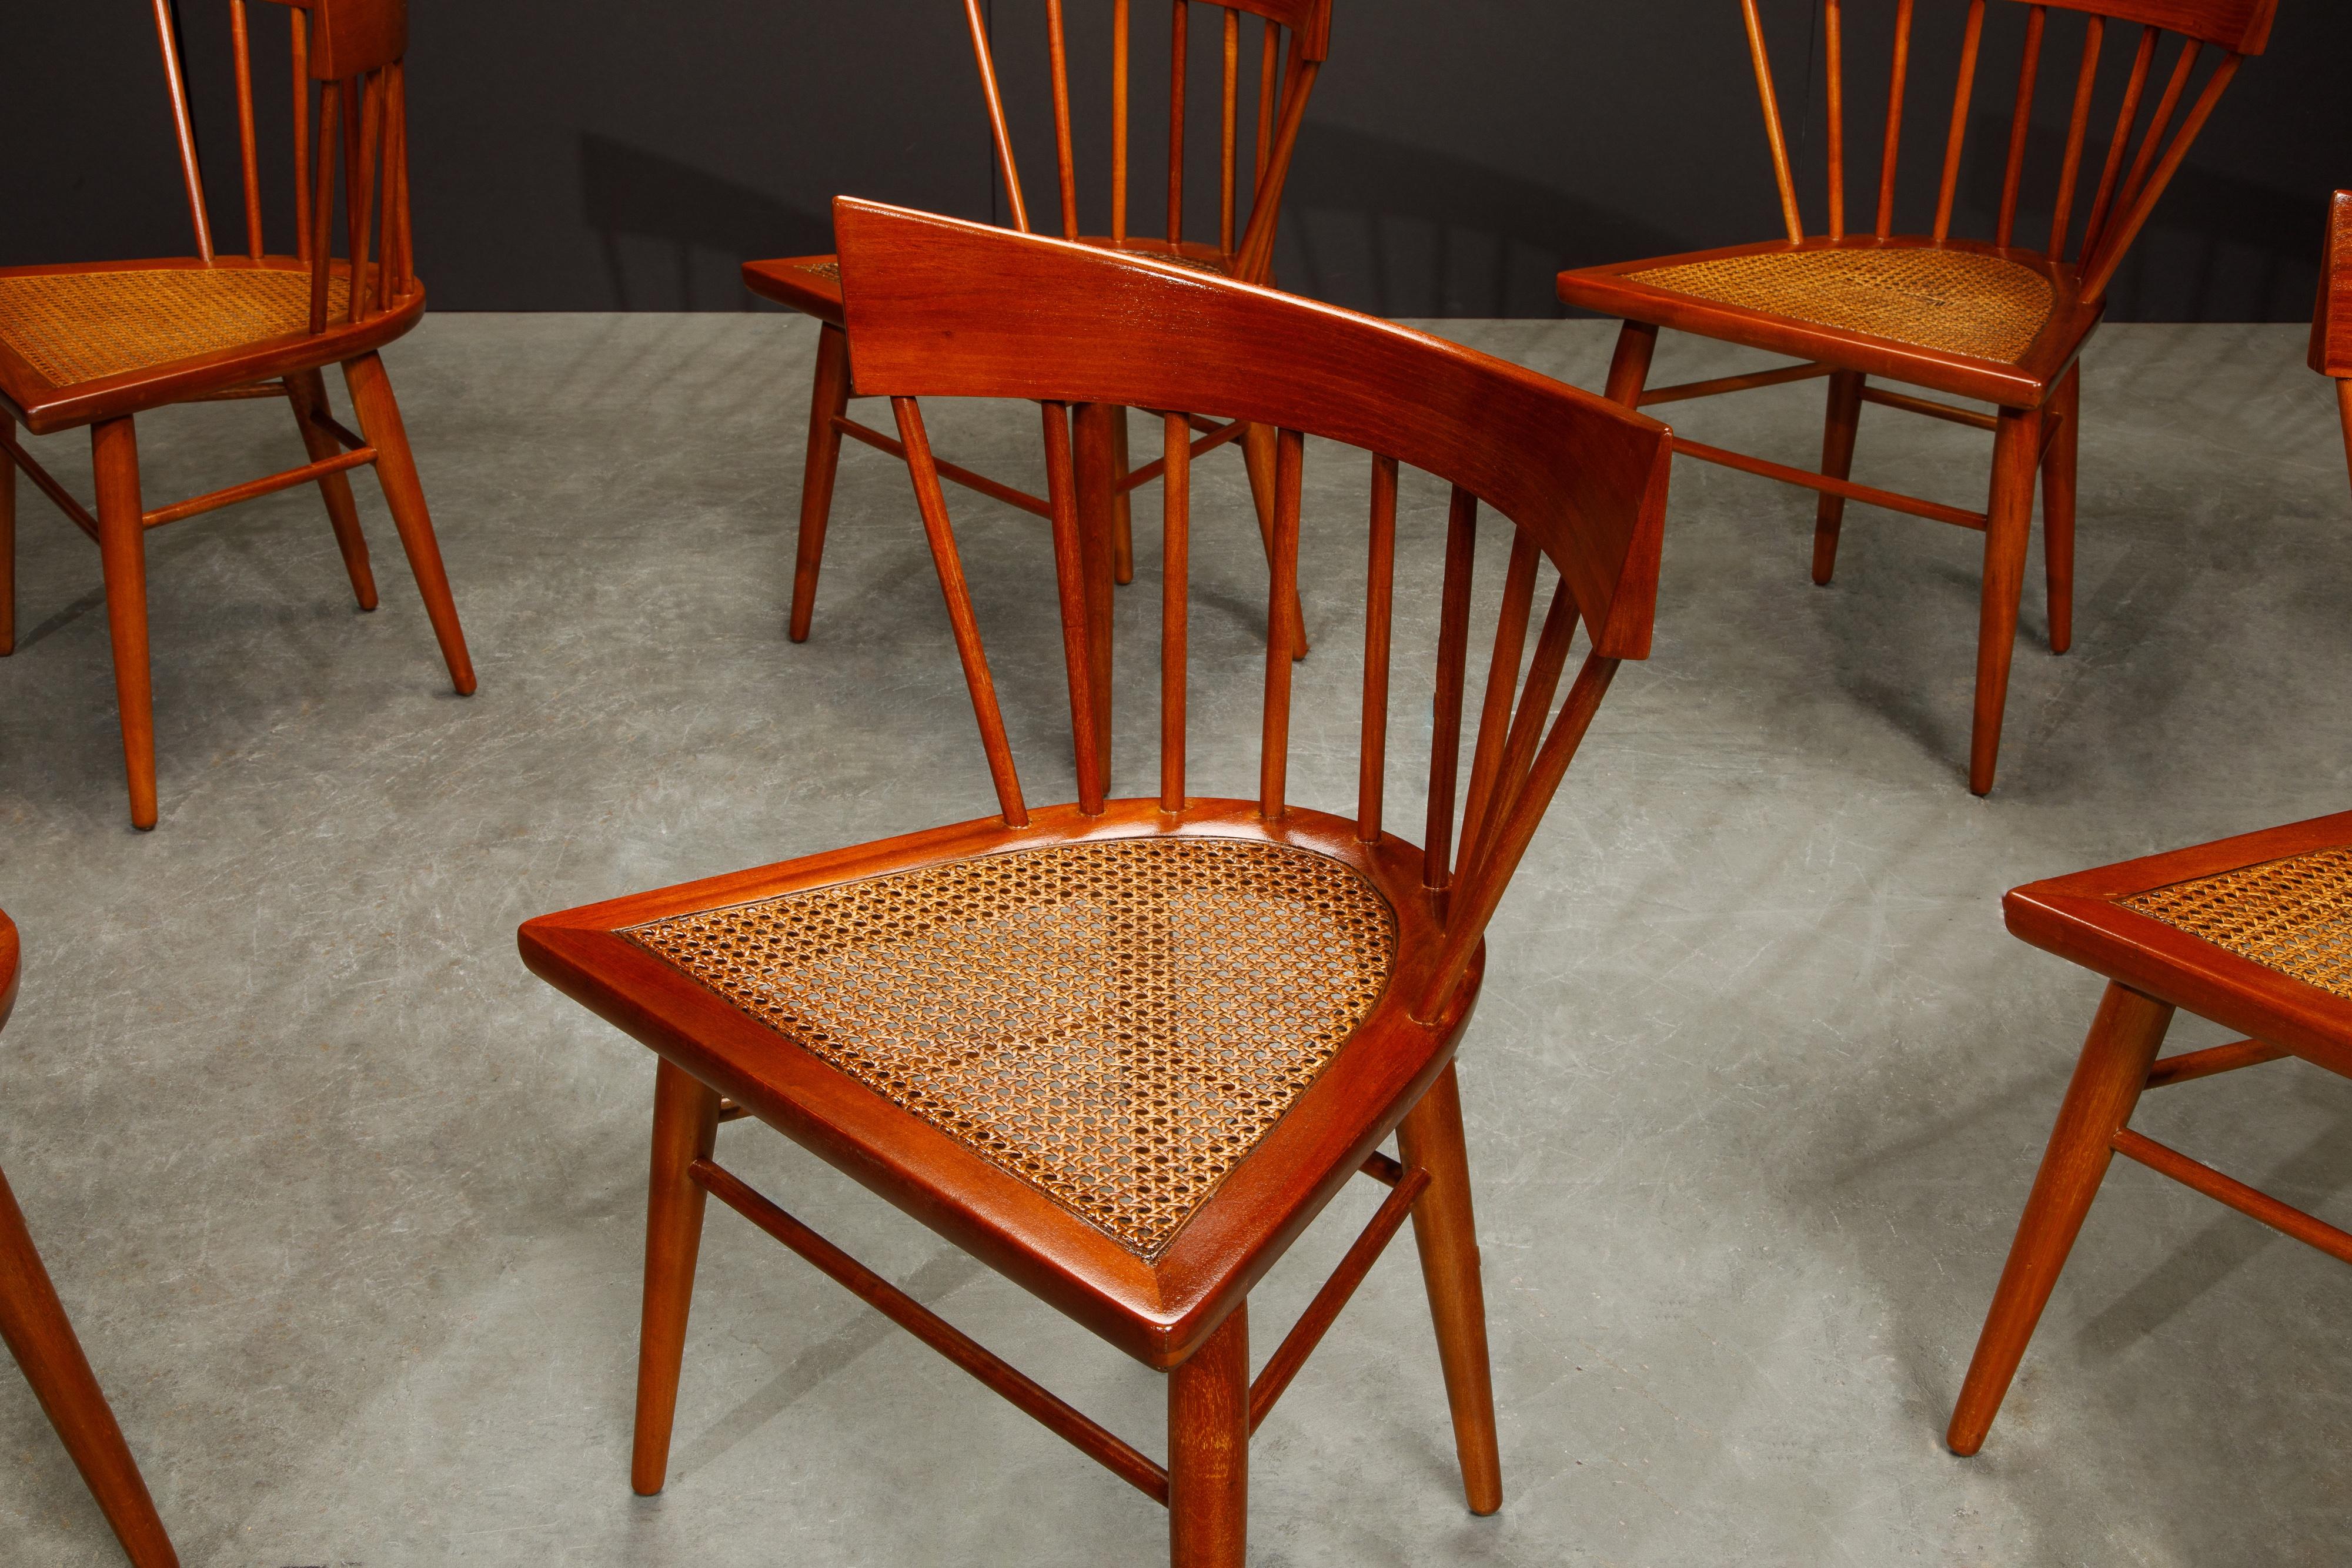 'Yucatan' Dining Chairs by Edmond Spence for Industria Mueblera, 1960s Signed For Sale 9